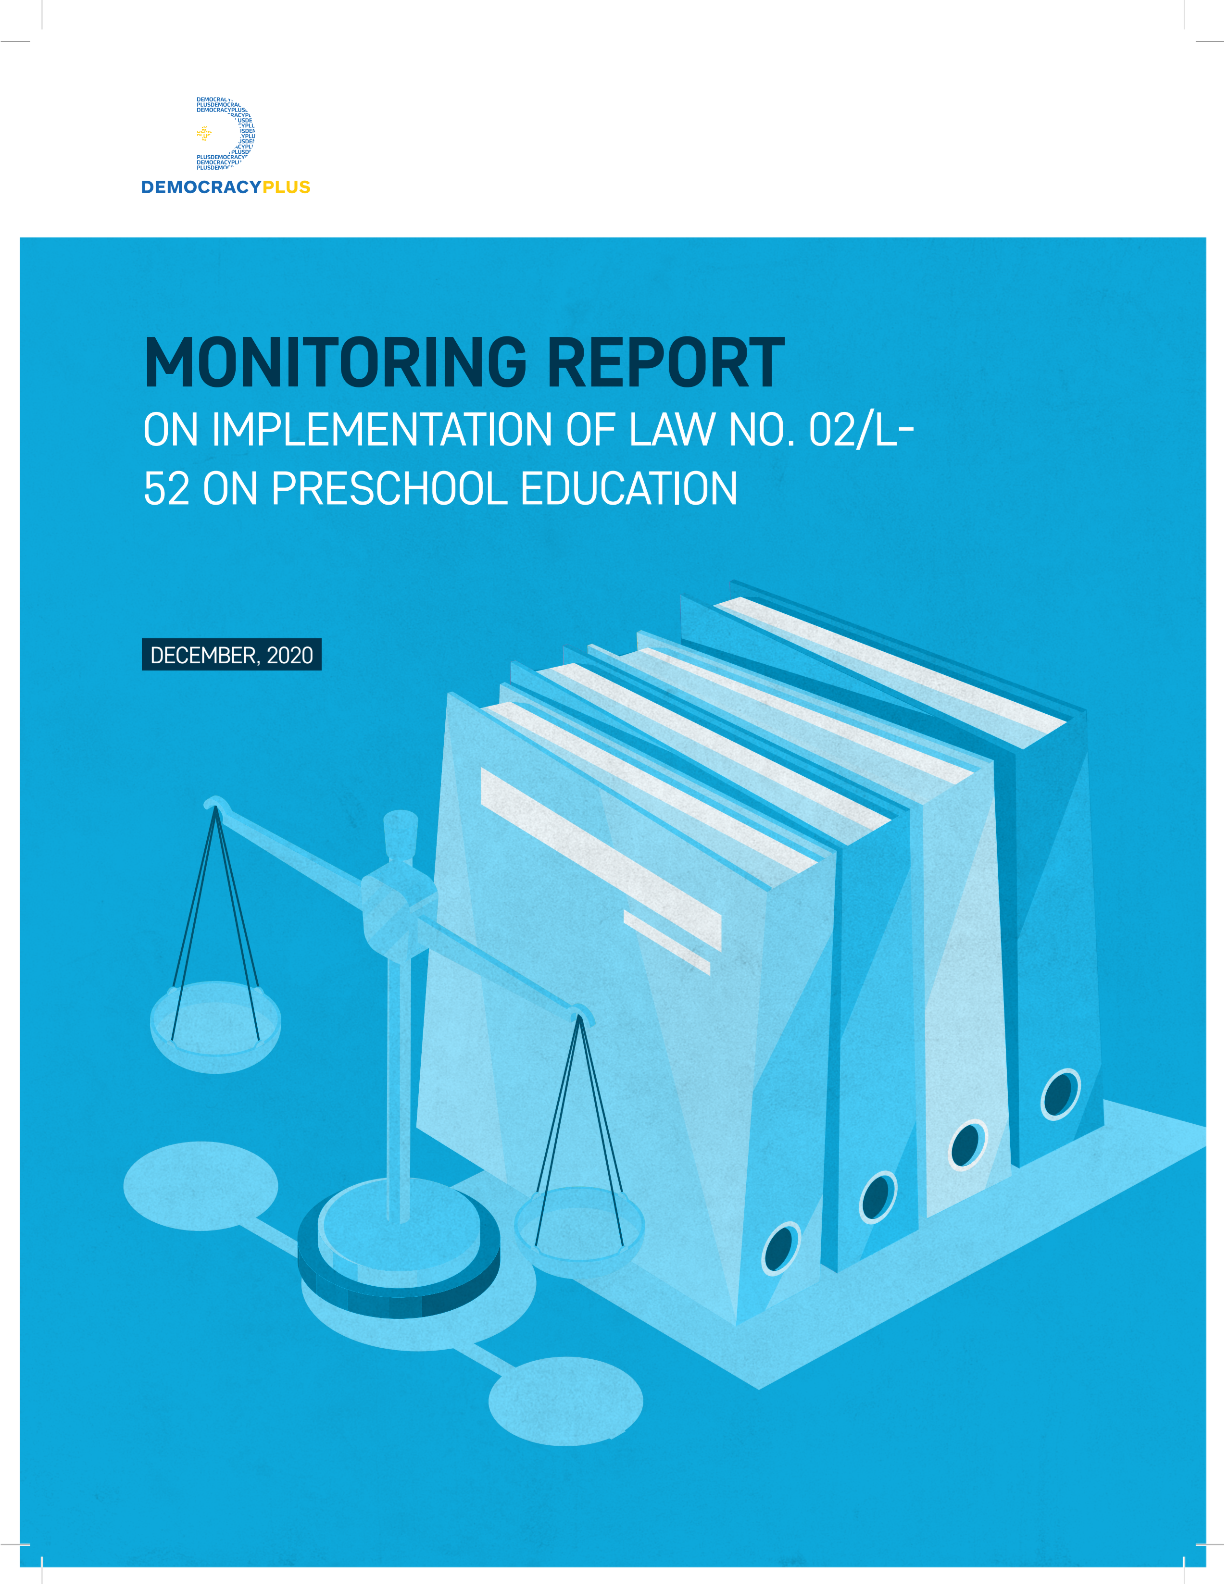 Monitoring report on implementation of law no. 02/l52 on Preschool Education